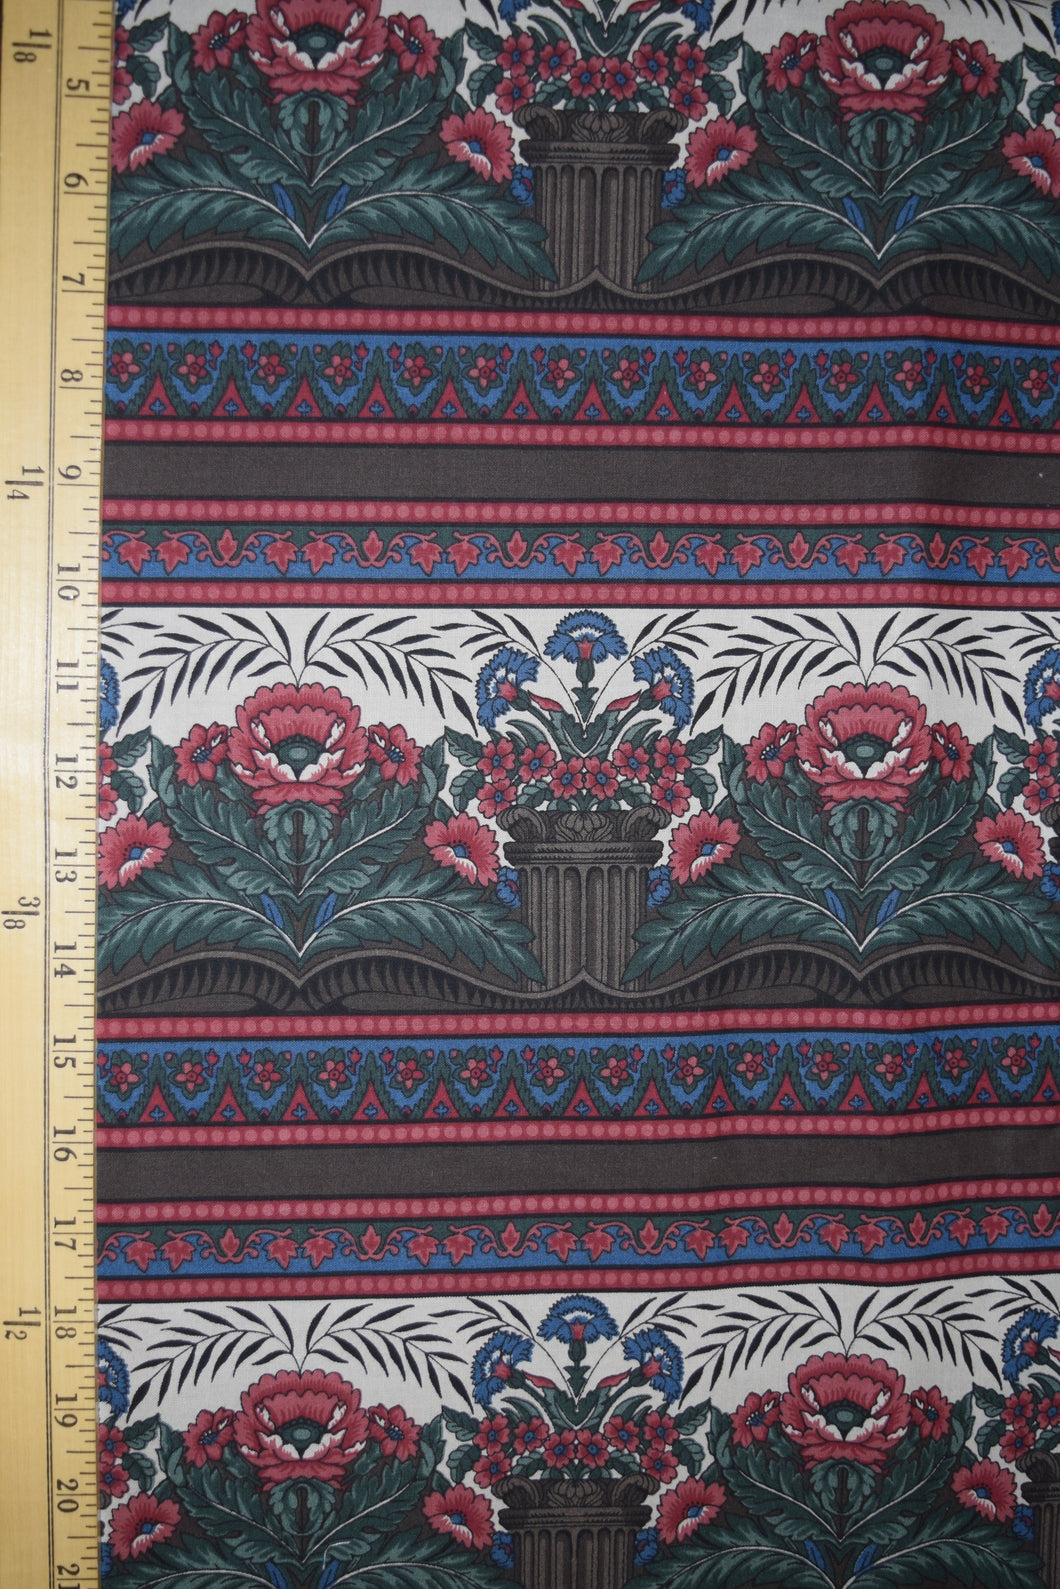 Jinny Beyer. Art deco botanical design in a border print. Shades of red, blue, and brown. 